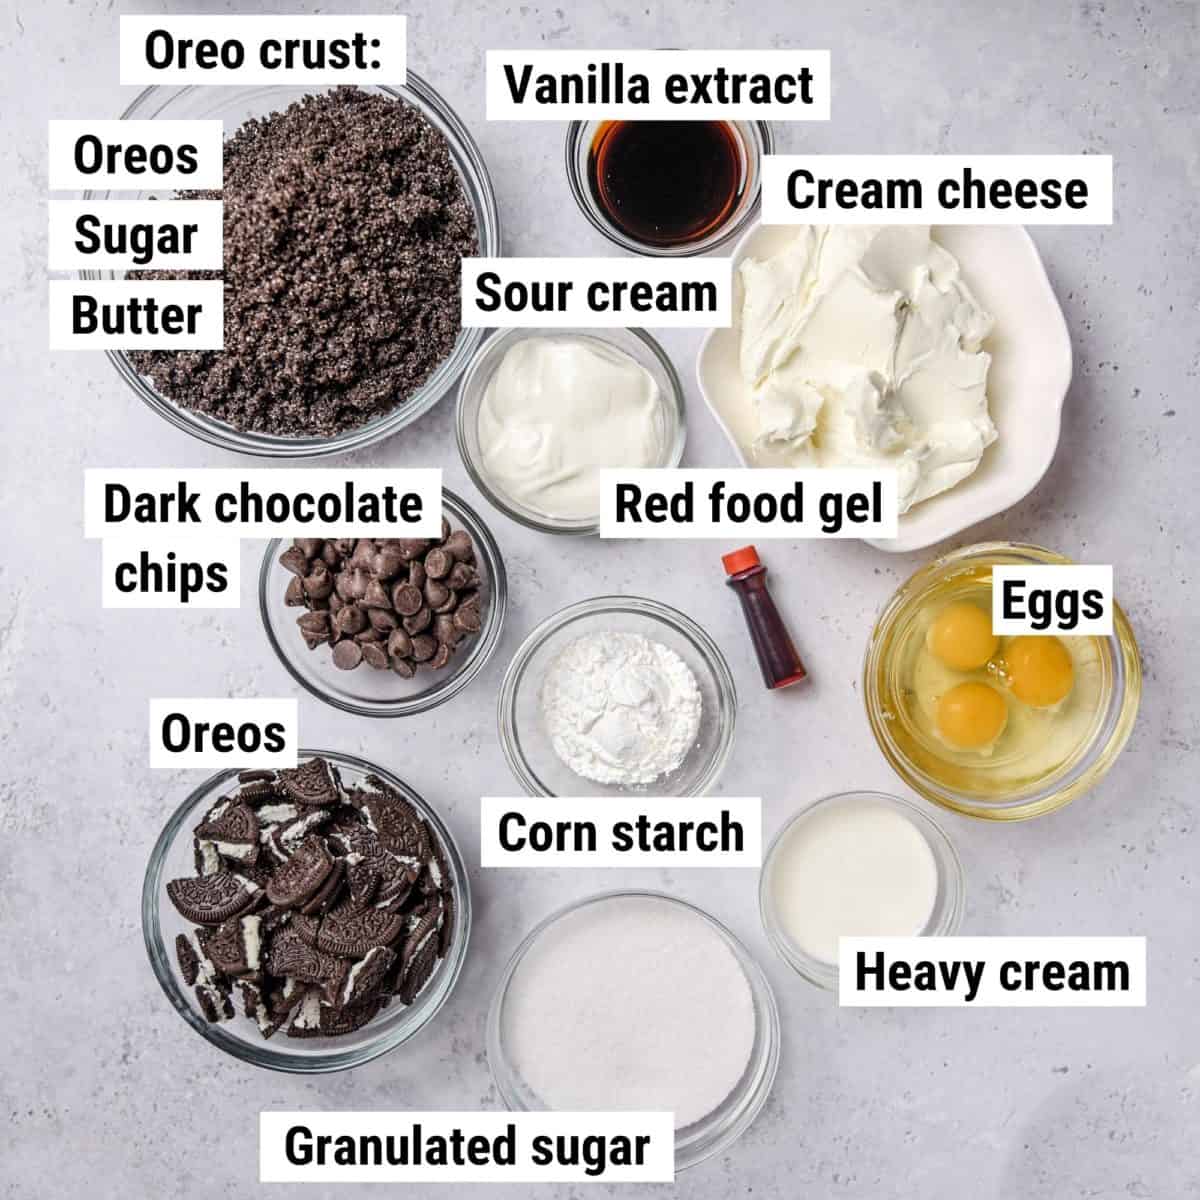 The recipe ingredients to make red velvet Oreo cheesecake spread out on a table.